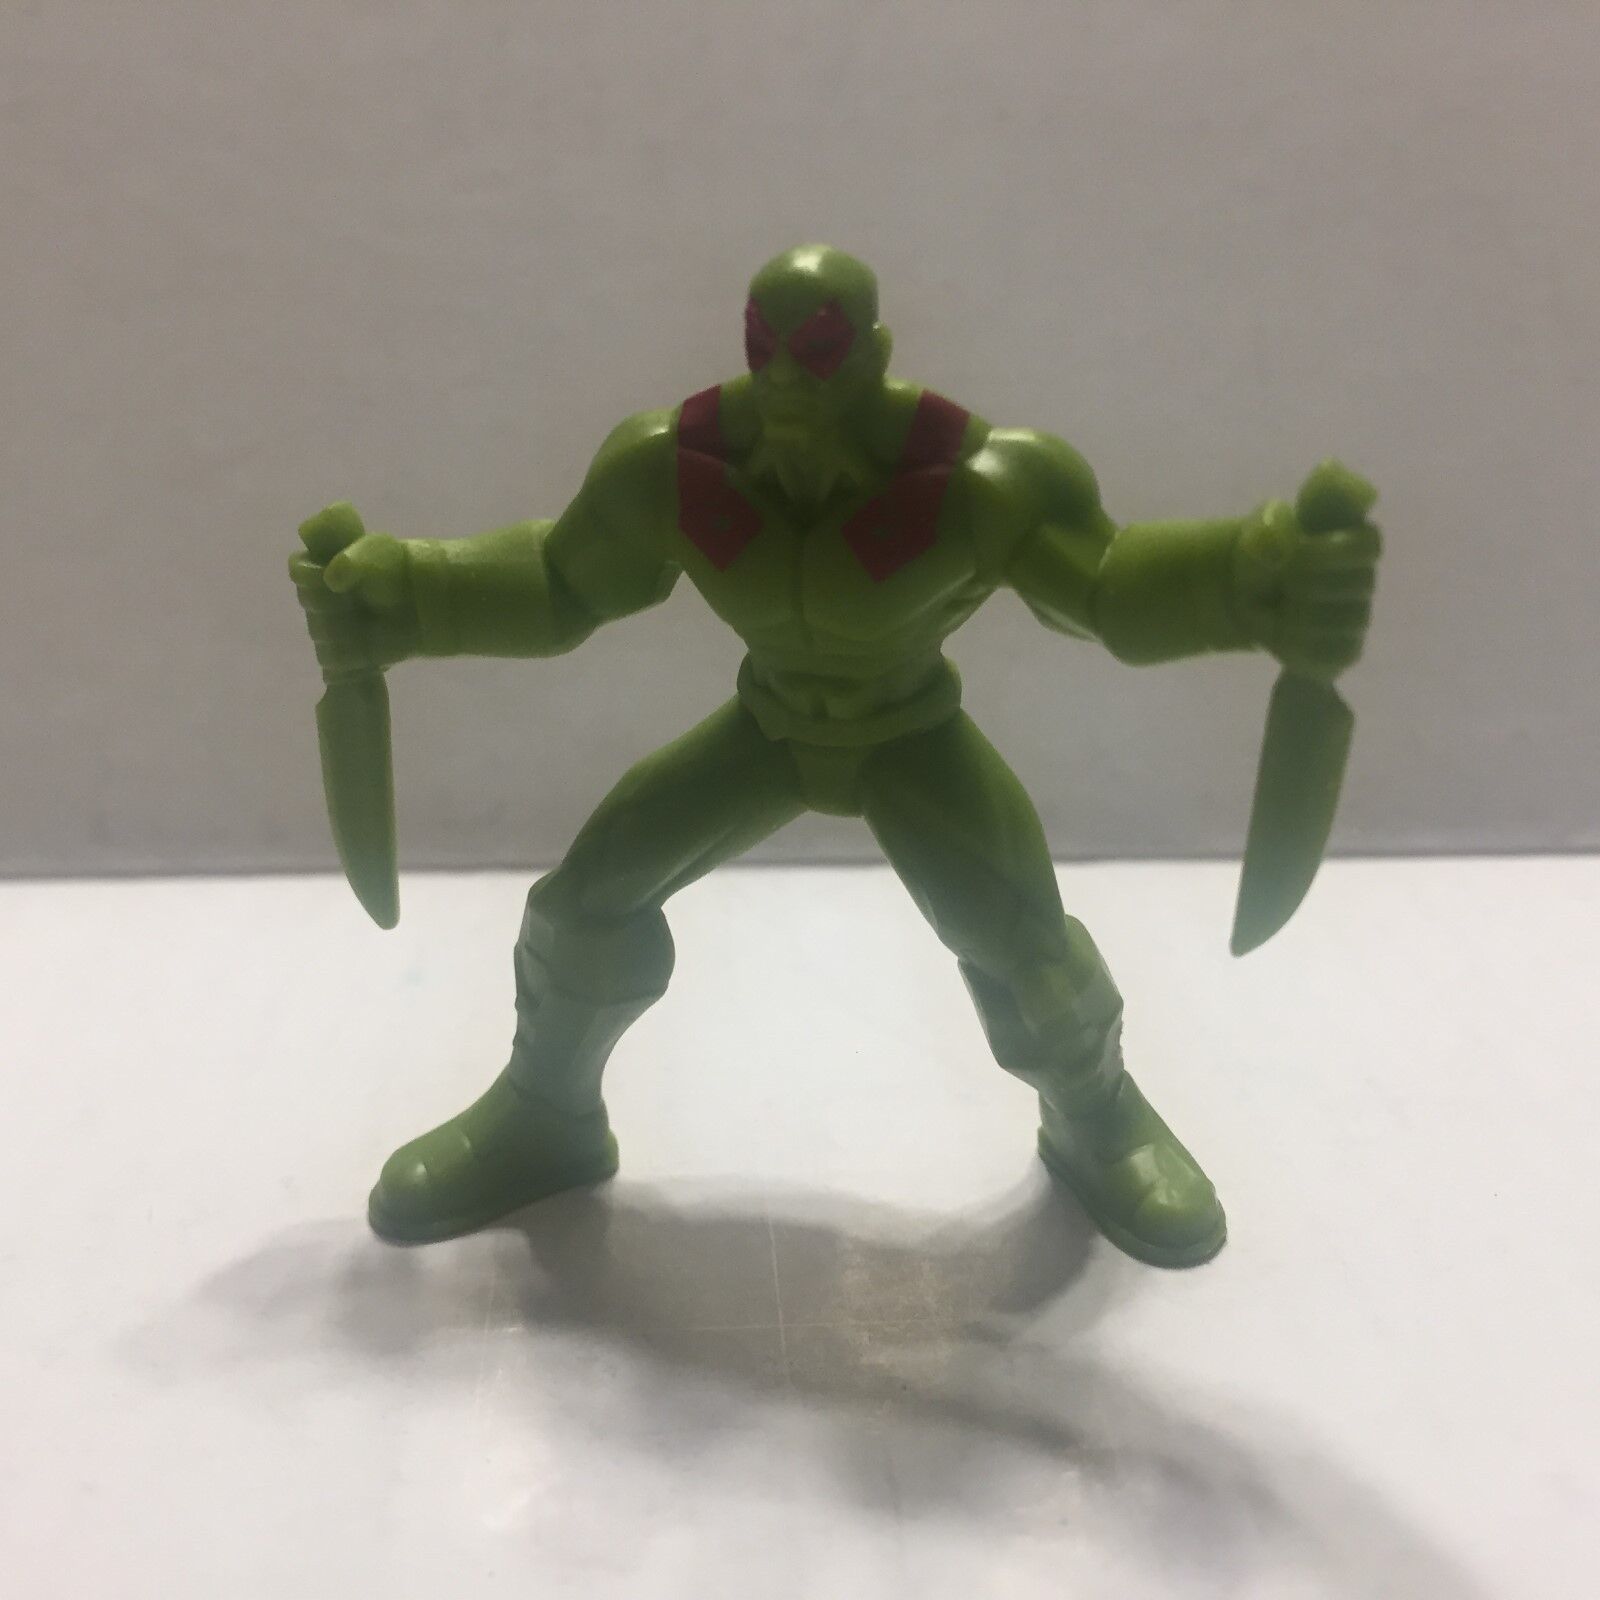 1.5" Drax the Destroyer figure  from Marvel Blind Pack - $8.50